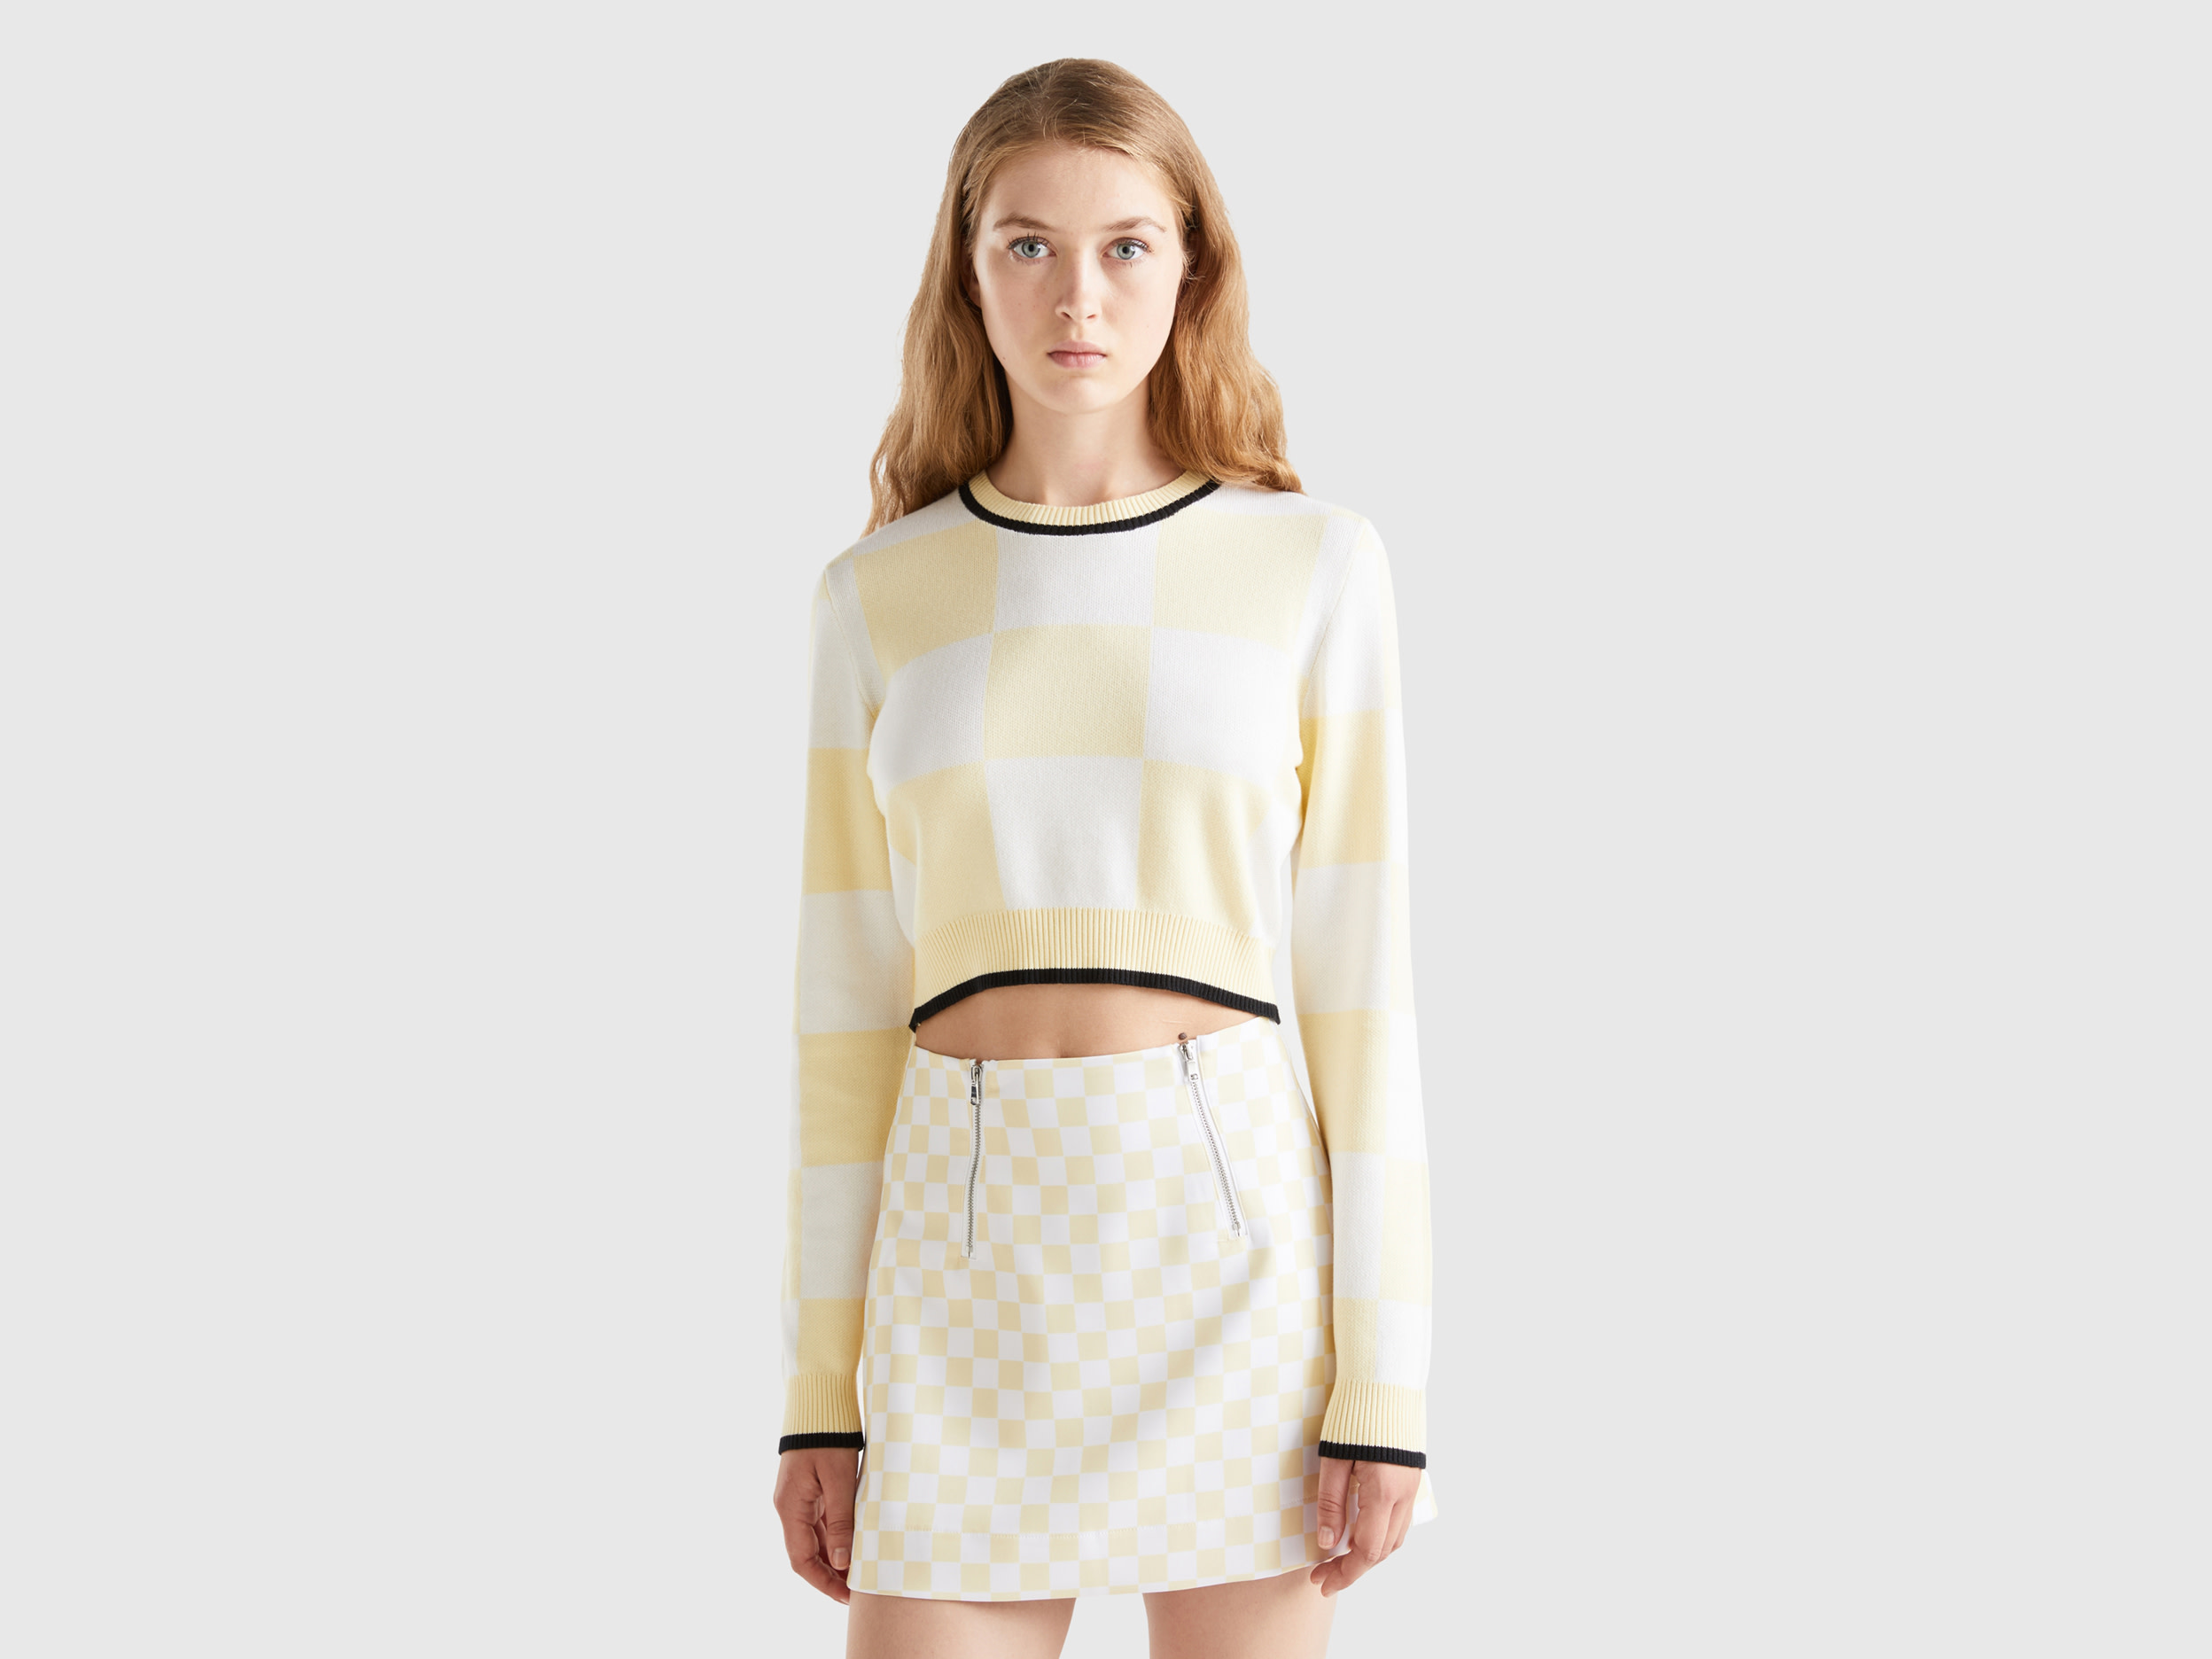 Benetton, Cropped Checkered Sweater, Size L, Yellow, Women